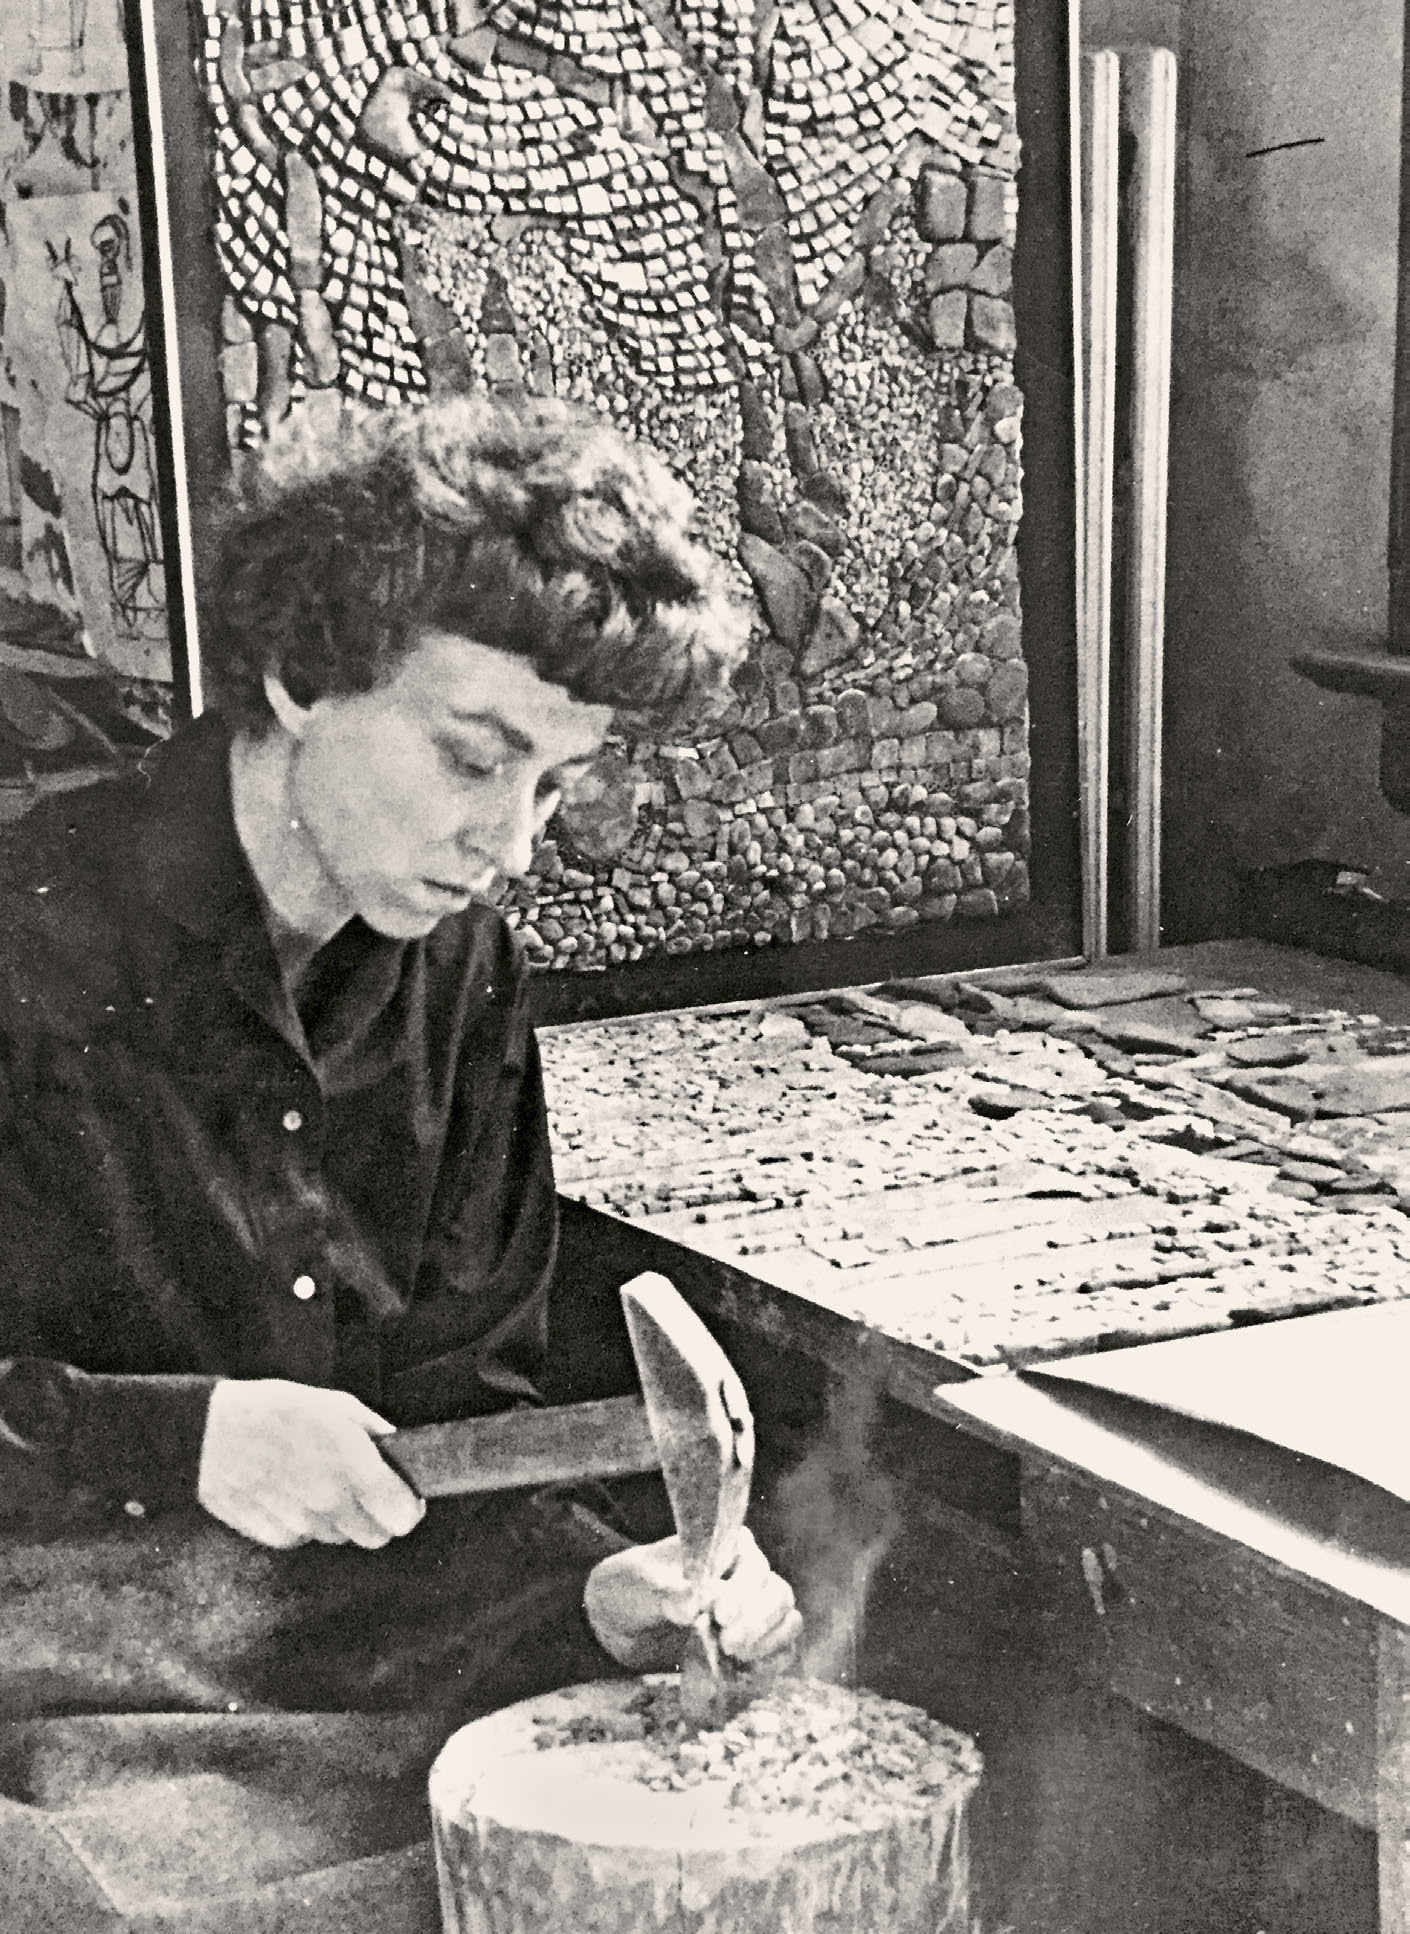 Kreilick working with a hammer and hardy in her University of Wisconsin-Madison Studio, circa 1959.